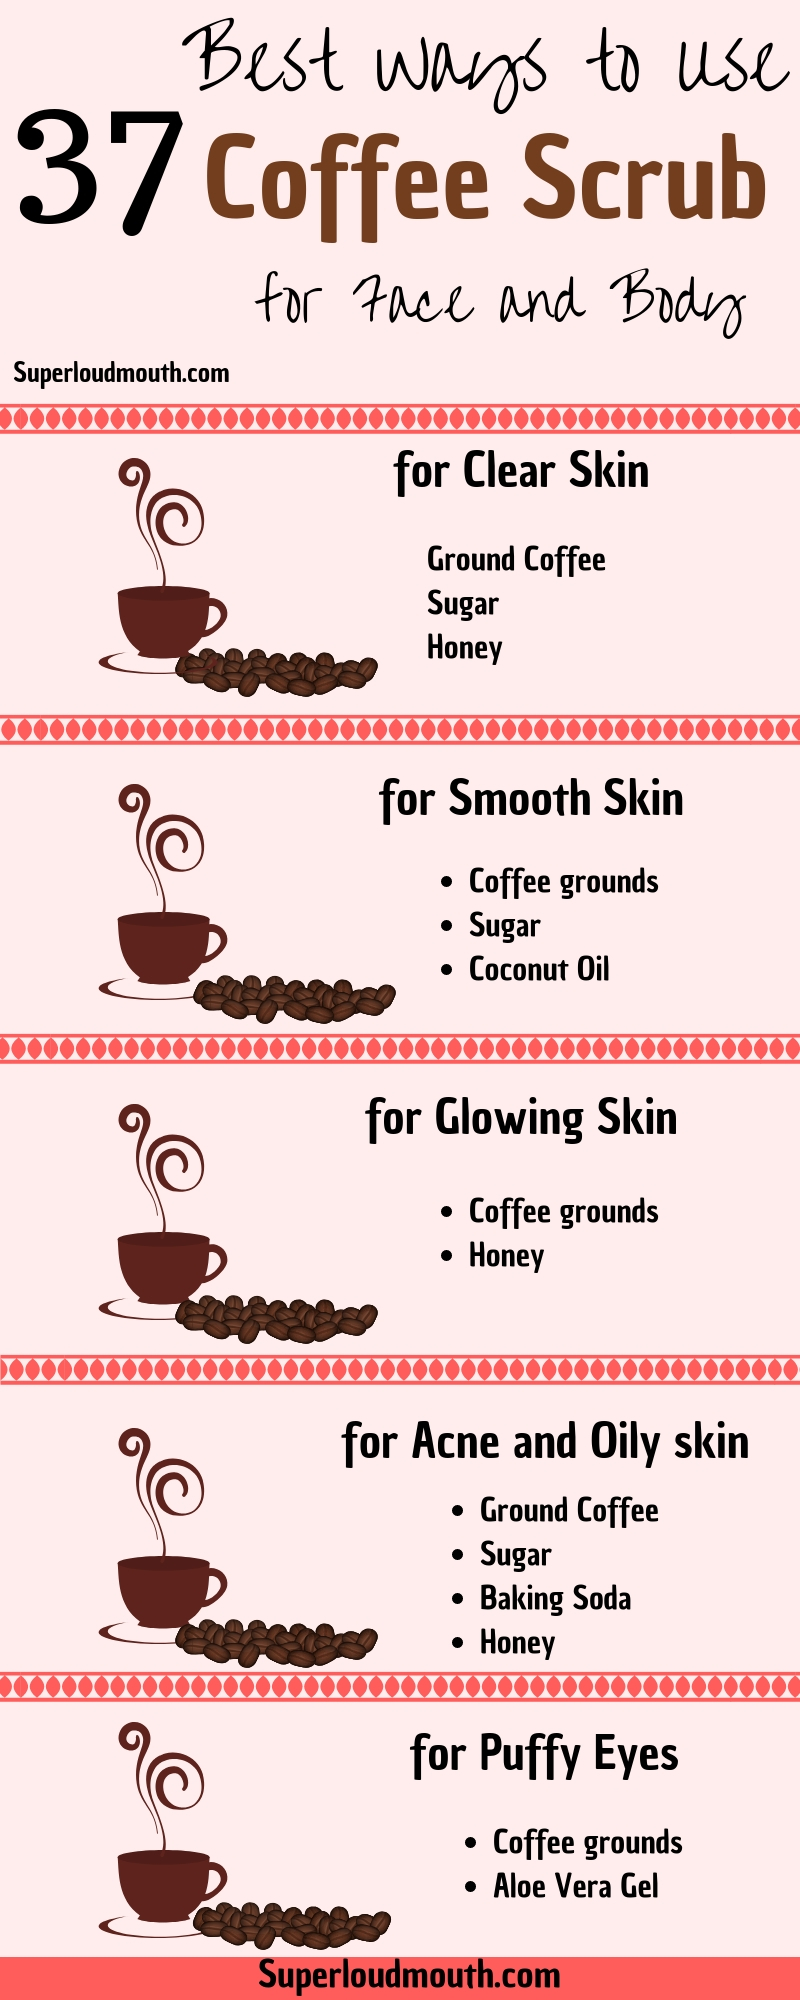 37 Diy Coffee Scrub Recipes for a Beautiful Face, Body and Cellulite -   19 beauty Tips products ideas